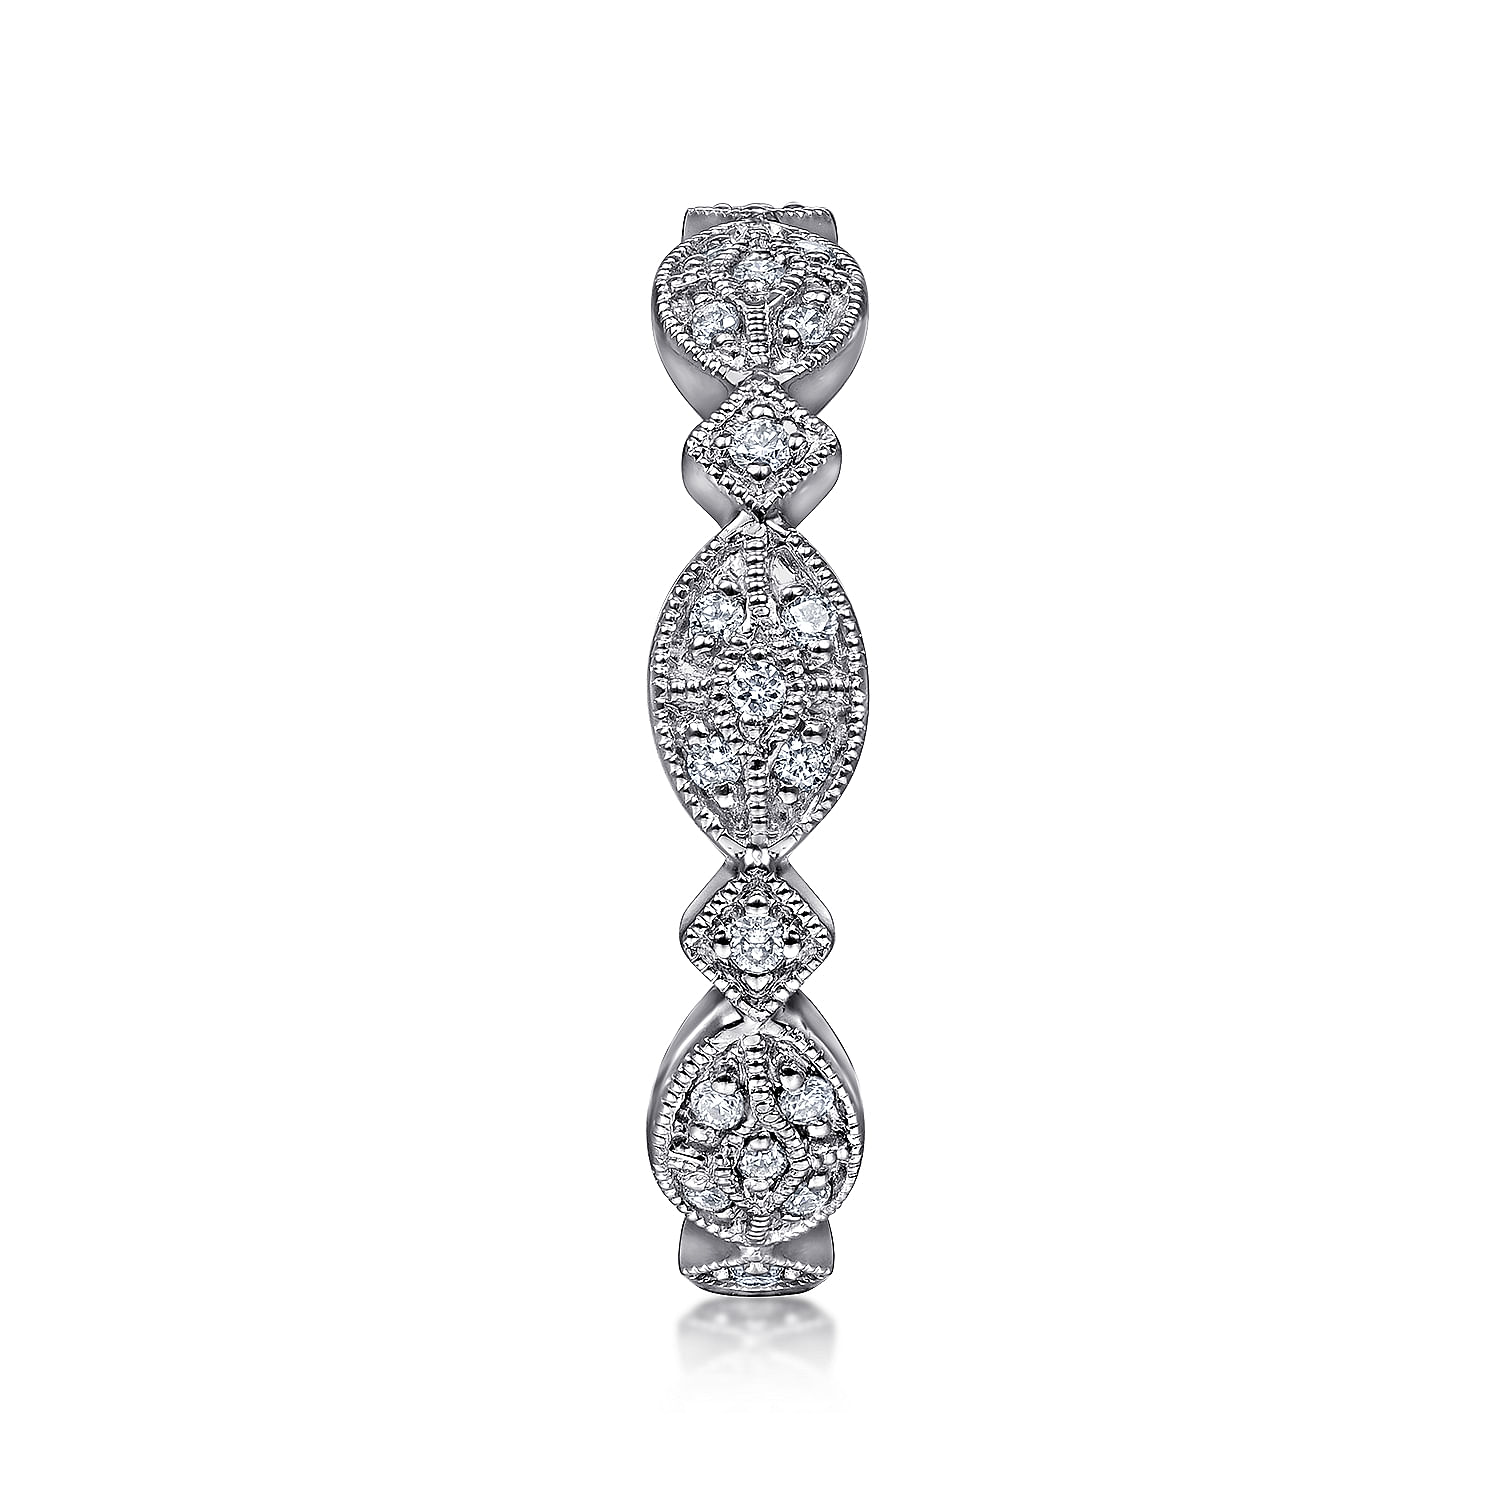 14K White Gold Marquise Station Pave Diamond Stackable Ring